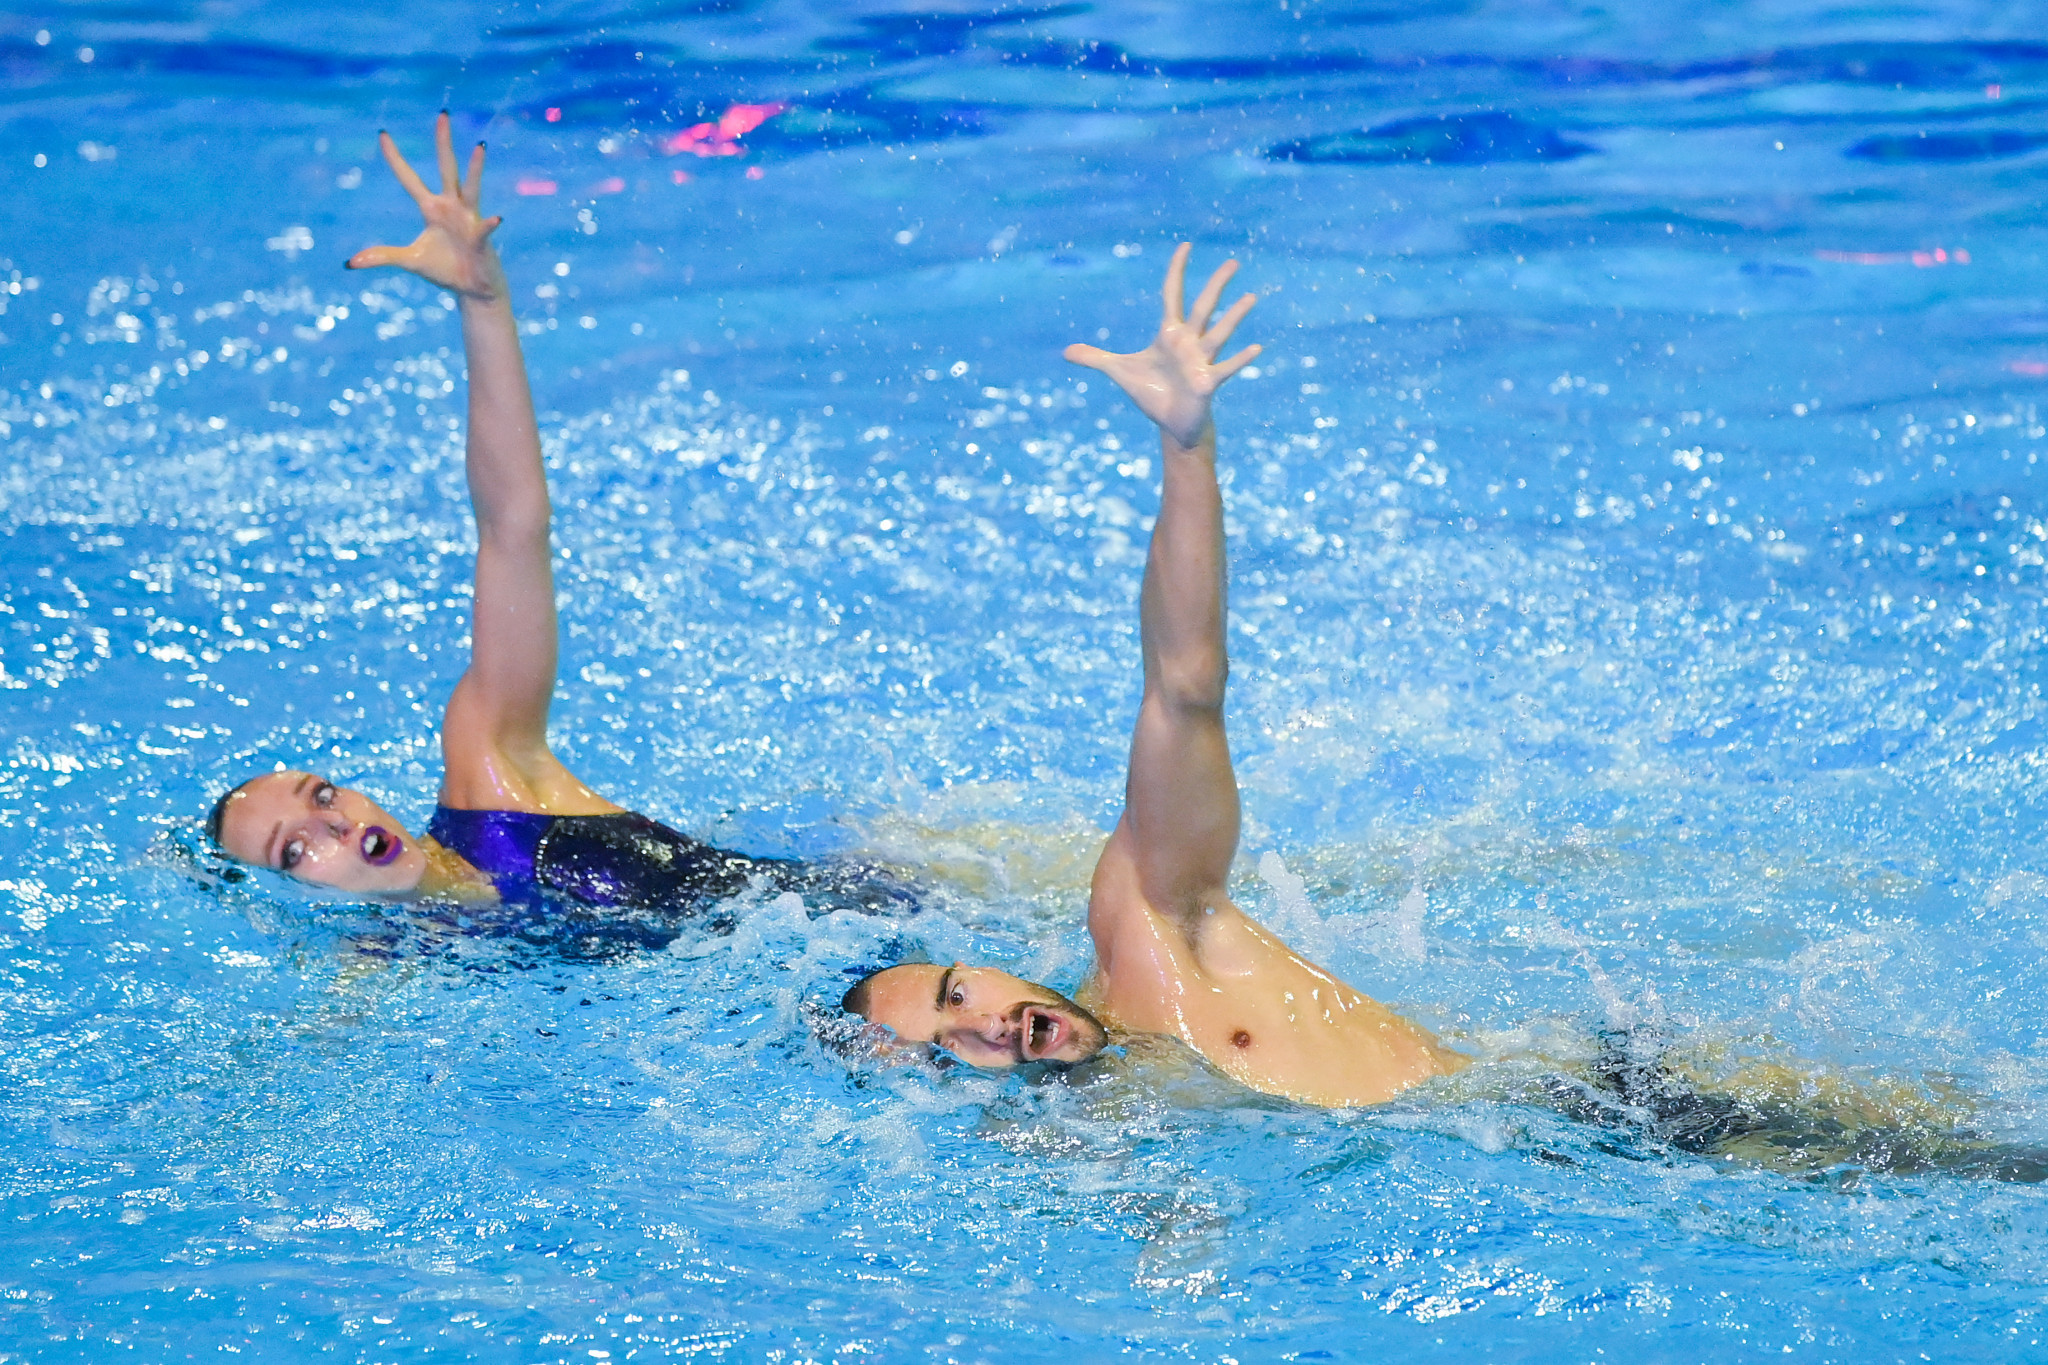 Emma García and Pau Ribes paired for gold in the mixed duet technical ©Getty Images